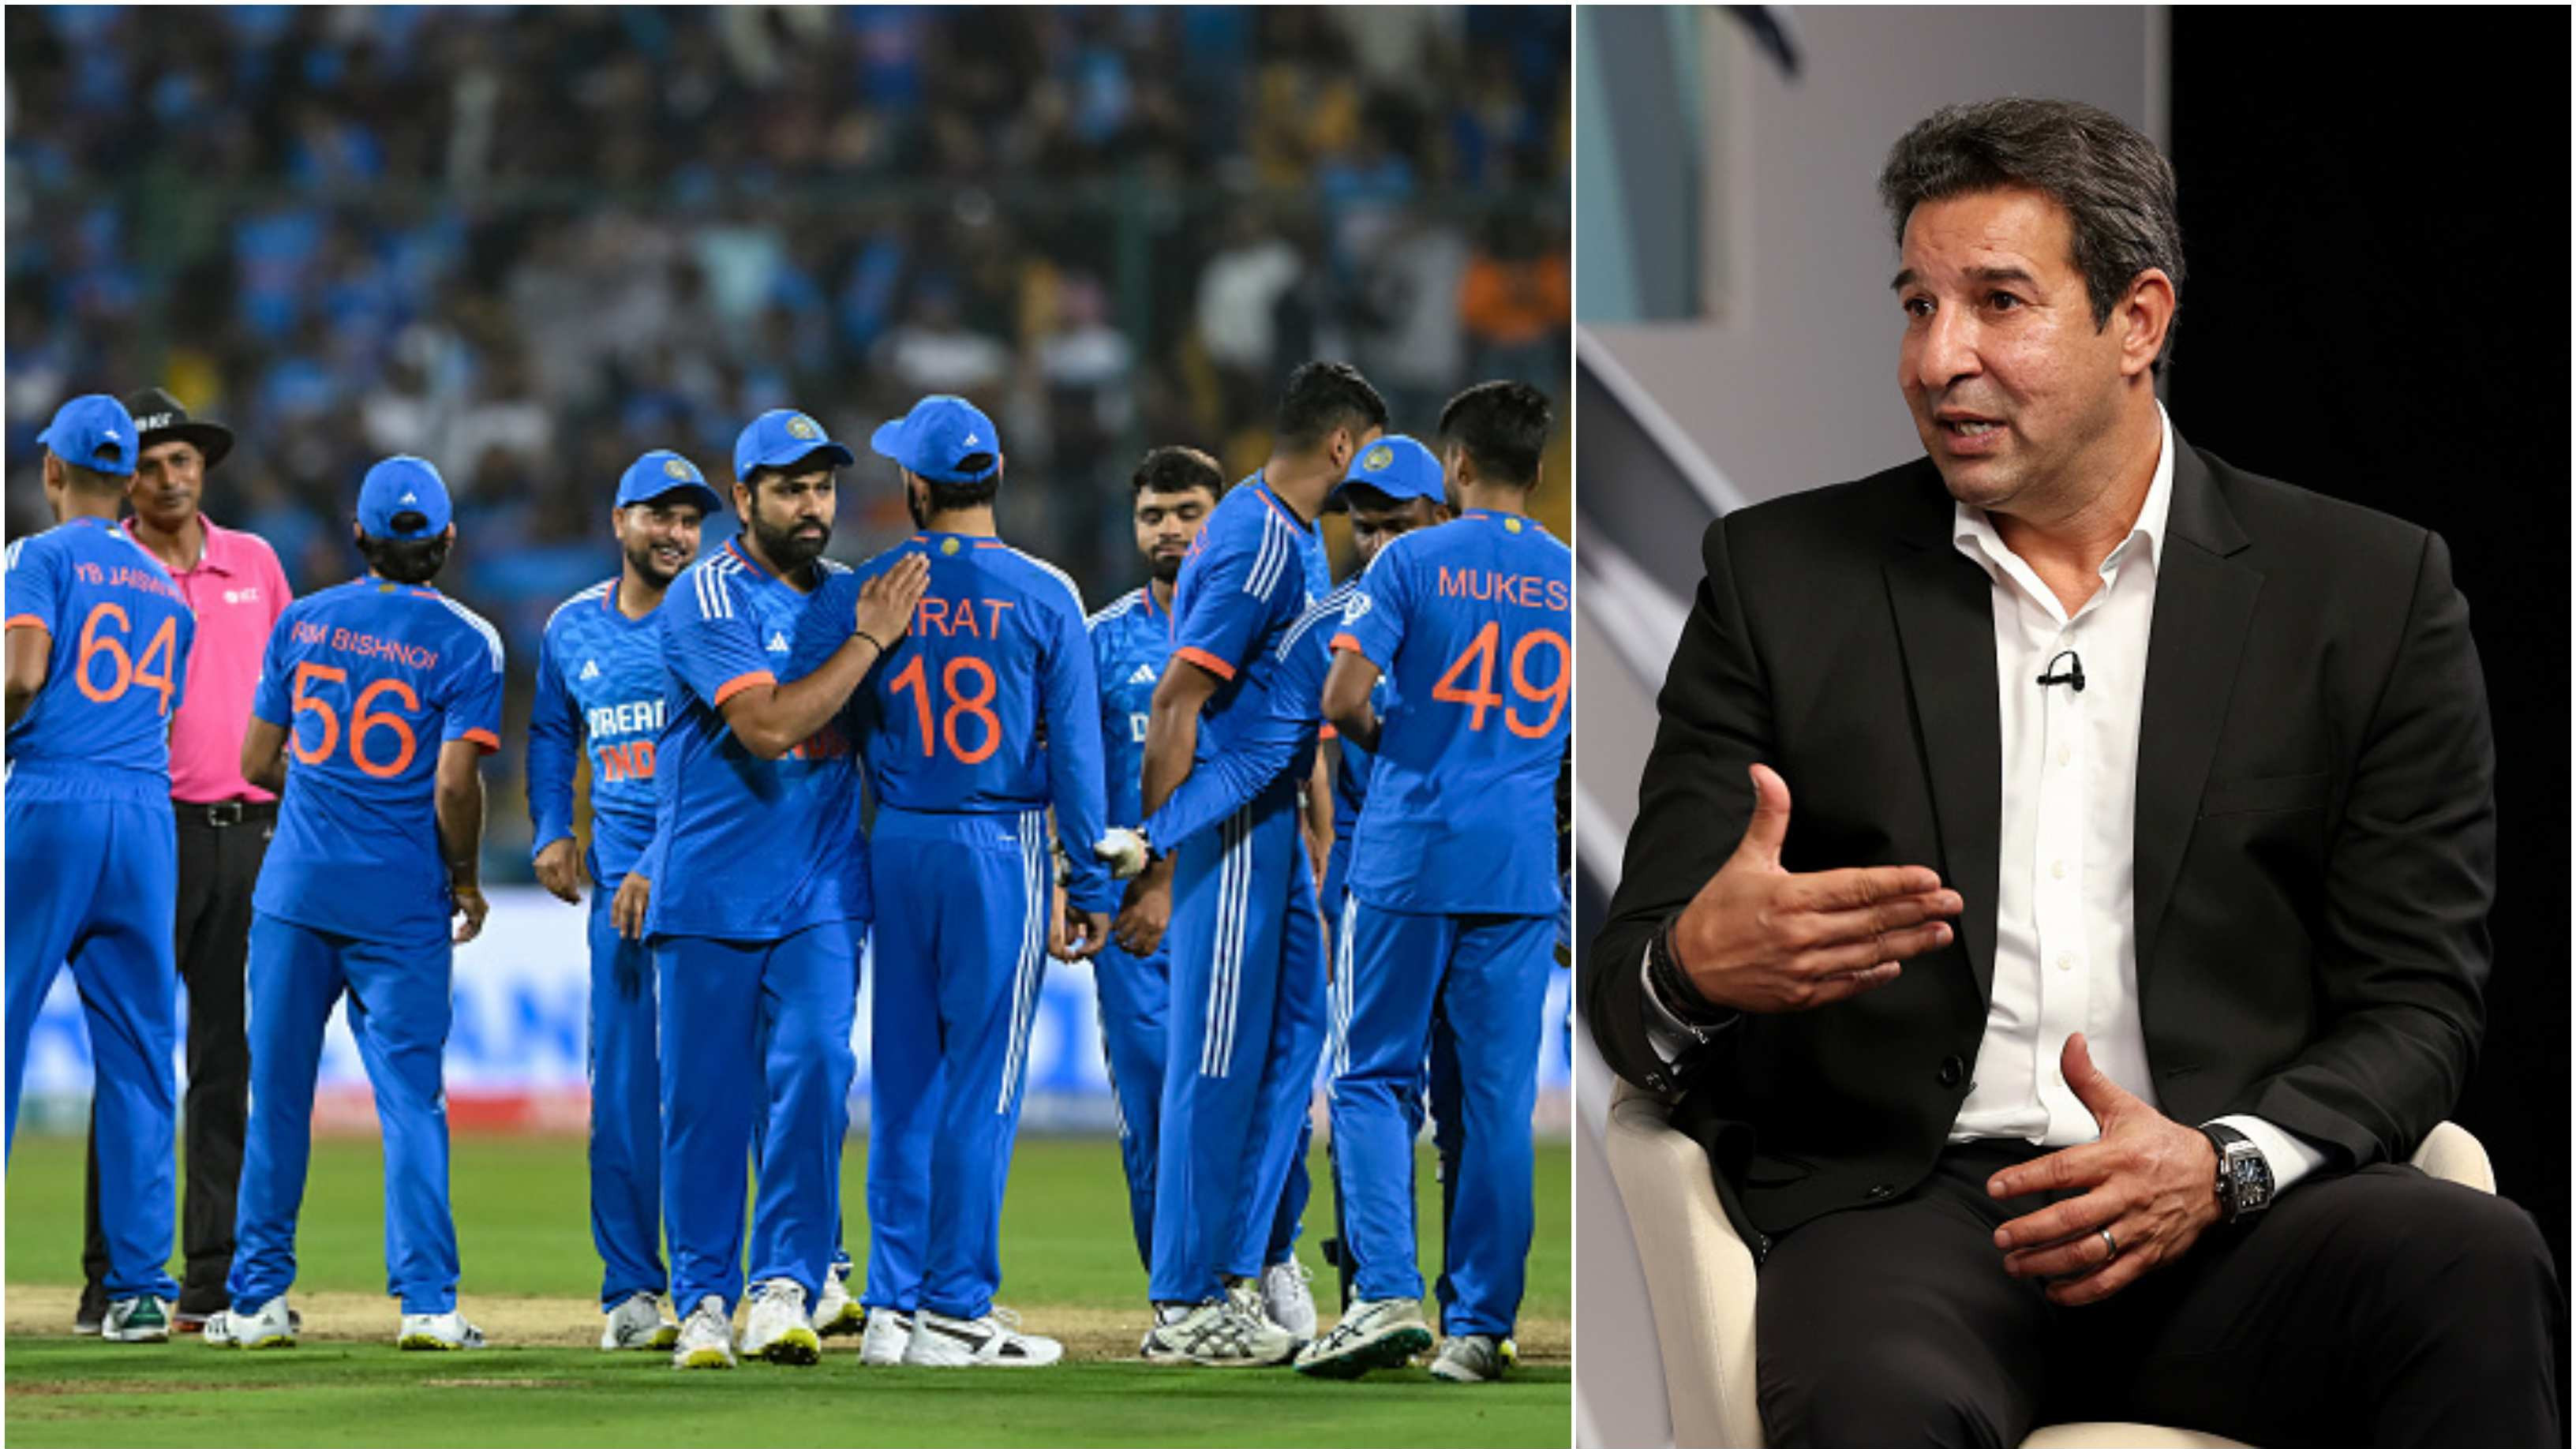 “It could be a blessing in disguise”: Wasim Akram on Indian T20 World Cup-bound players not featuring in IPL final